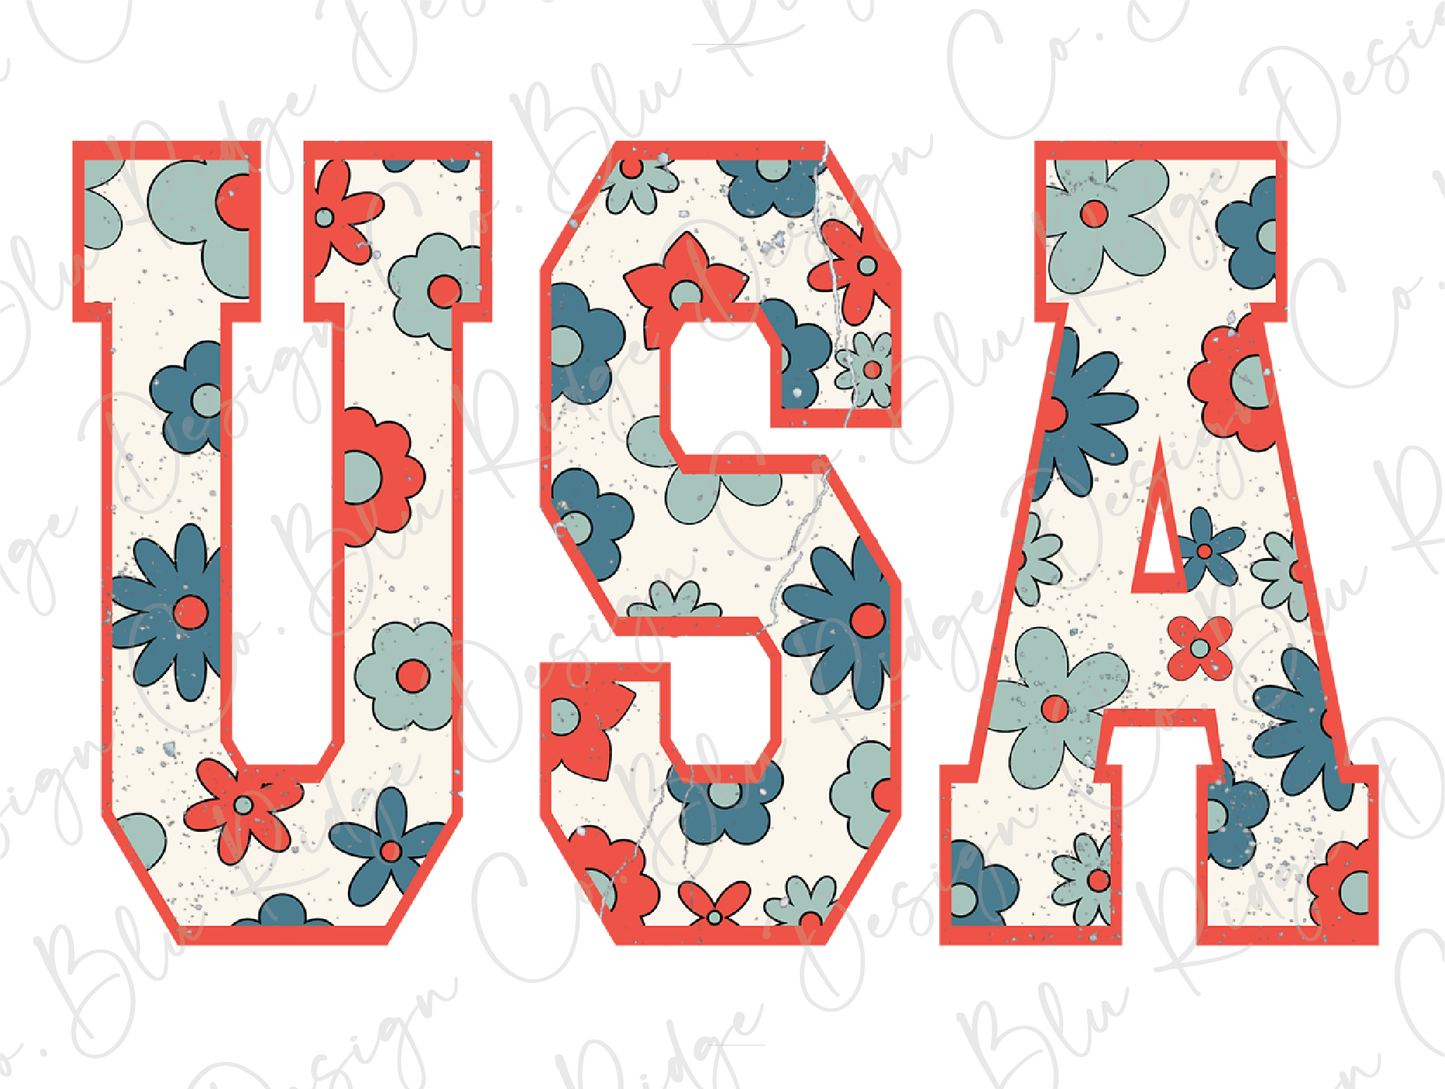 USA Red White and Blue Floral Retro July 4th Patriotic Design Direct To Film (DTF) Transfer